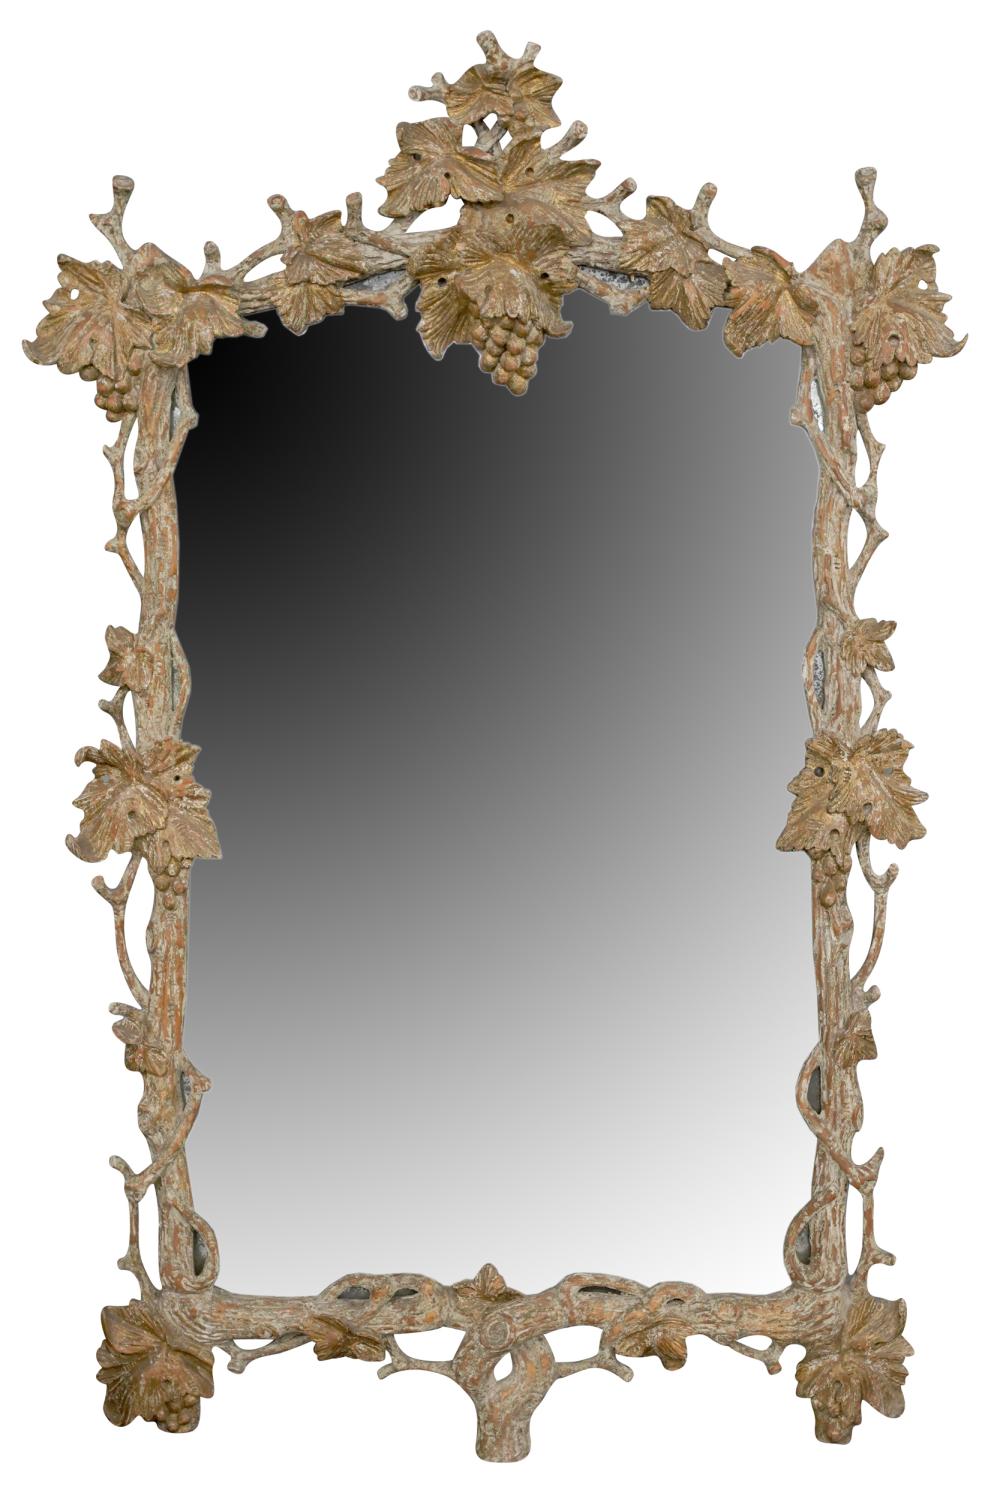 PICKLED & GILTWOOD MIRRORcontemporary;